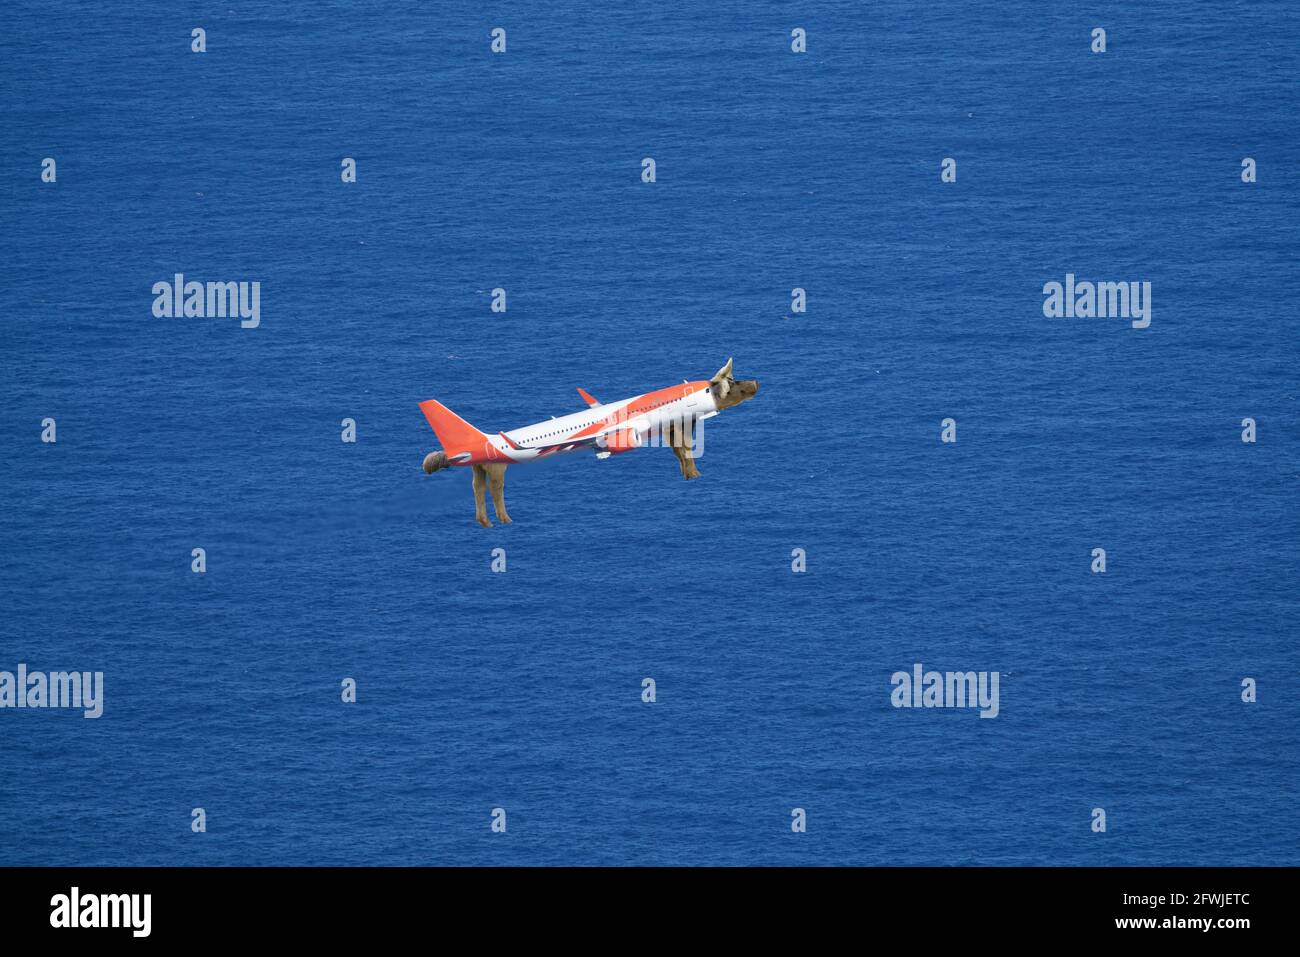 airplane with swine body over the ocean Stock Photo